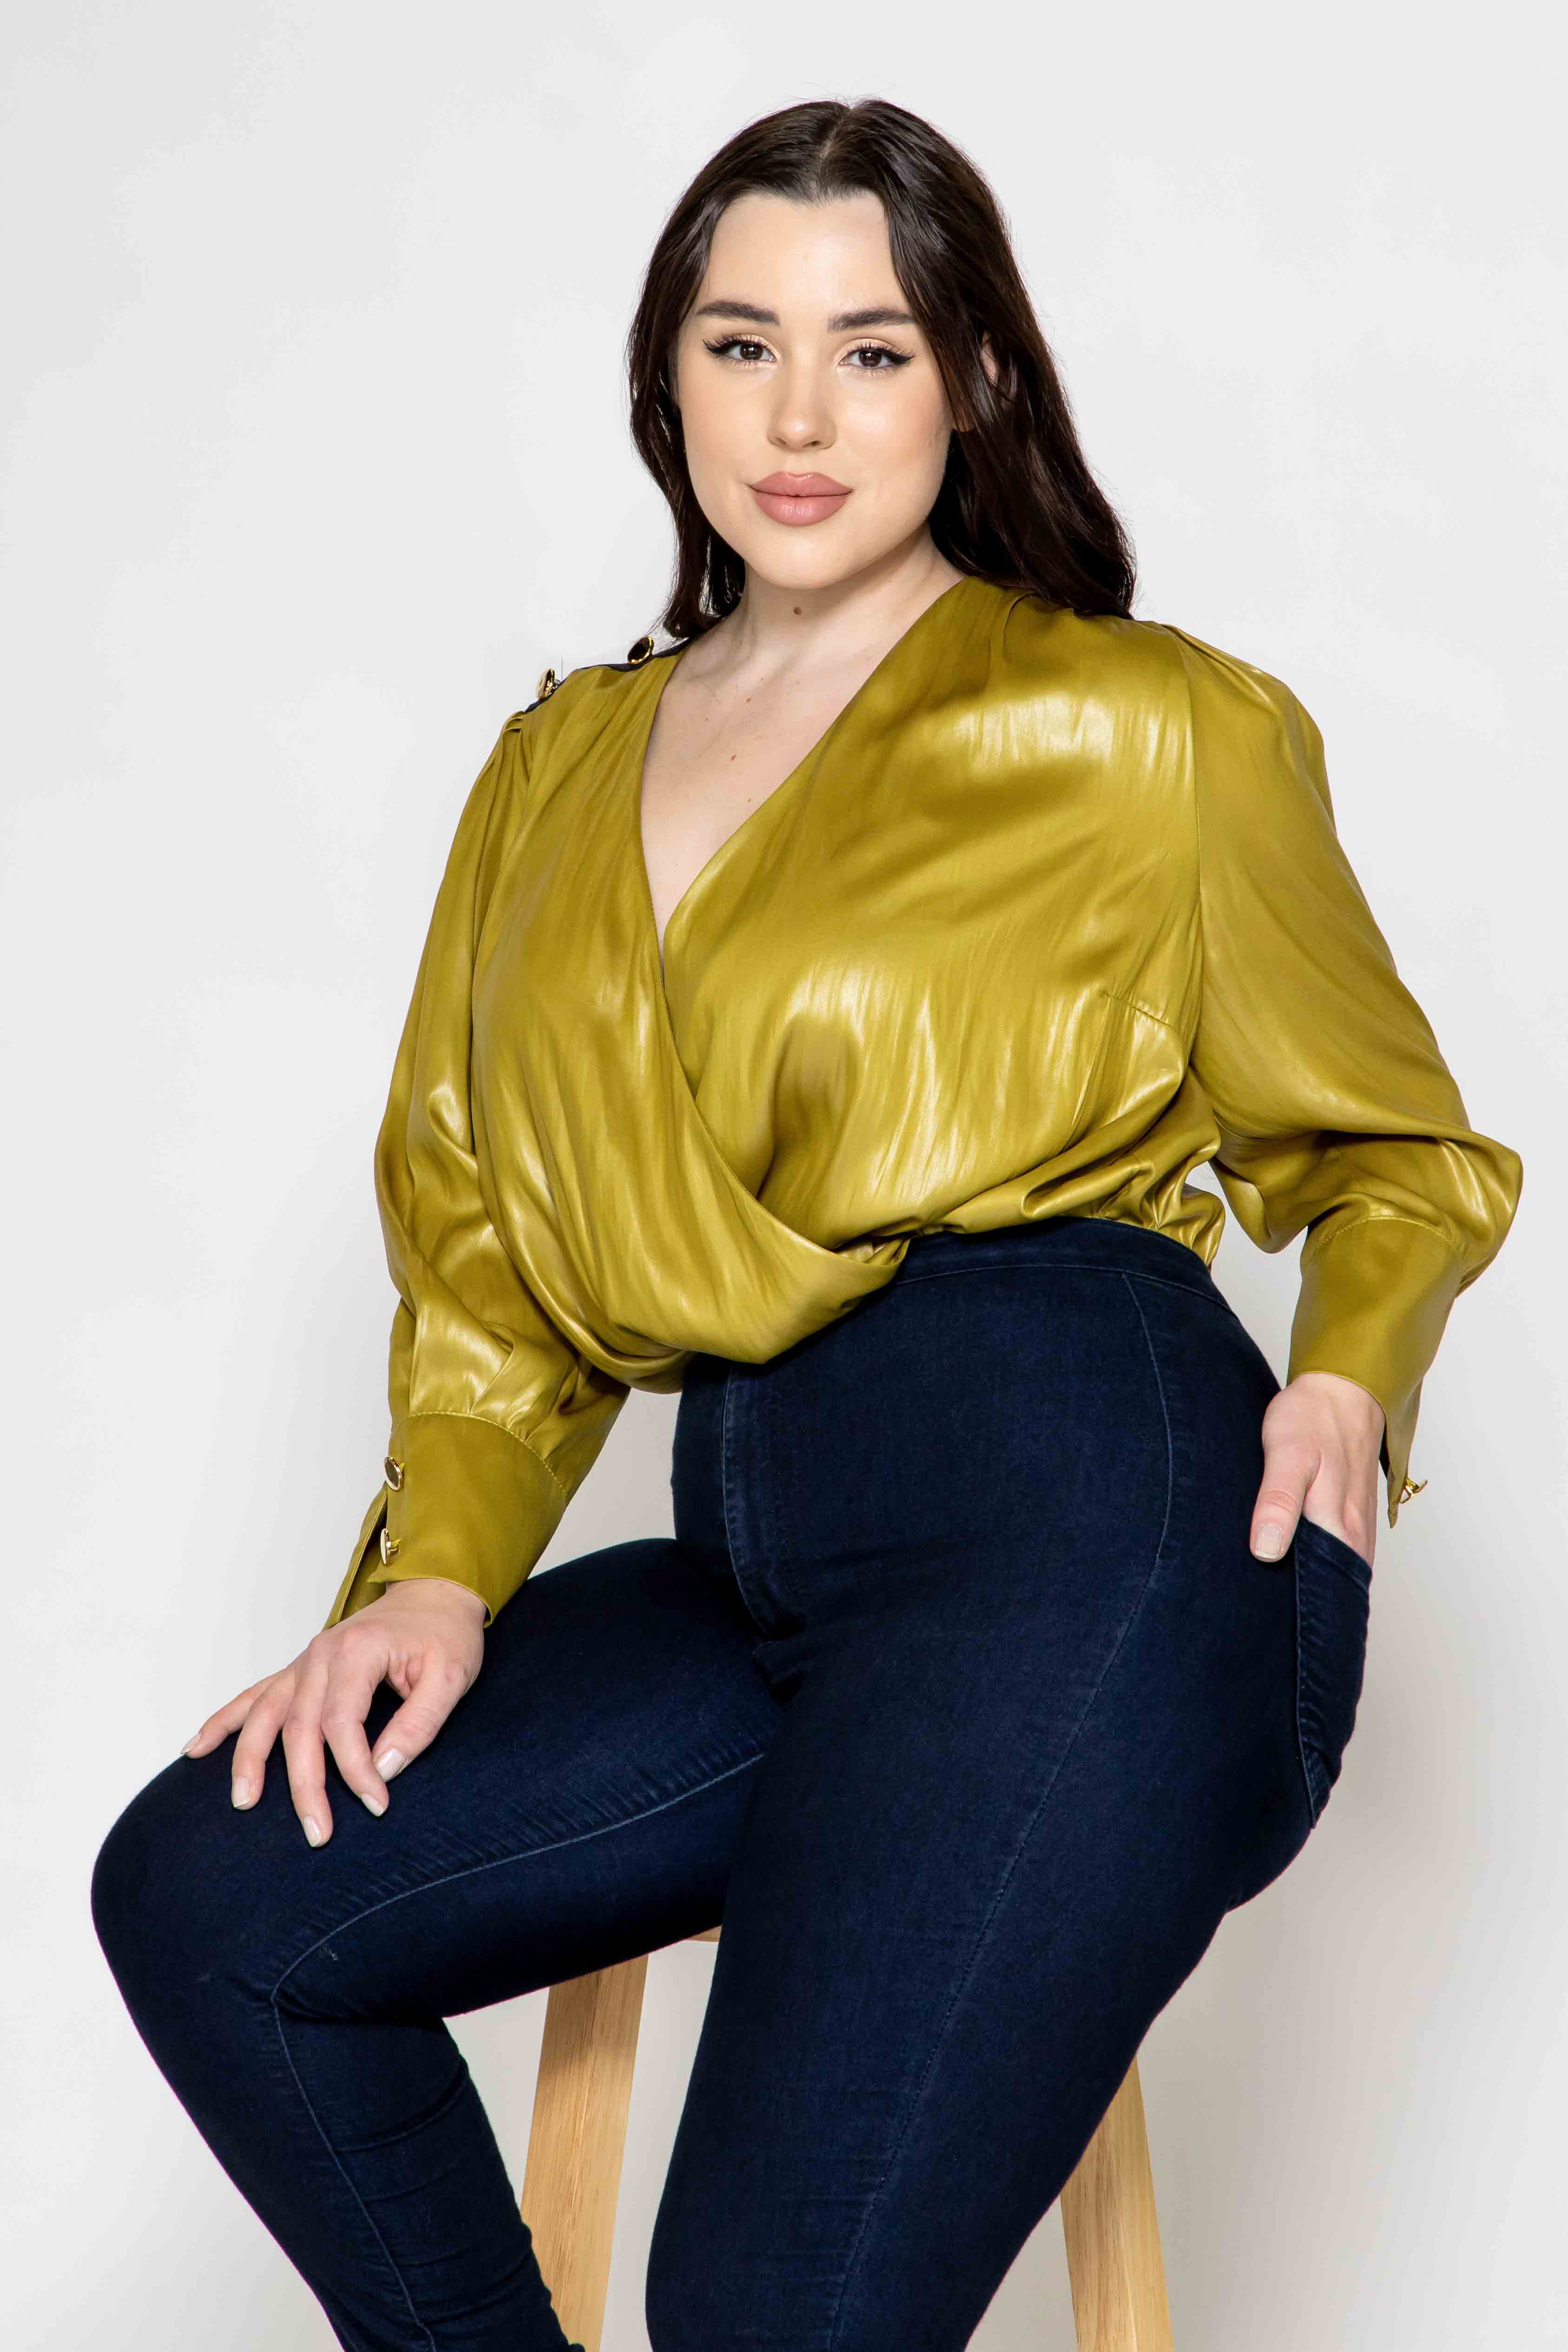 AnnaCristy Milano TOPS 50 Nicia Green and Gold Wrap Body Suit Plus Size